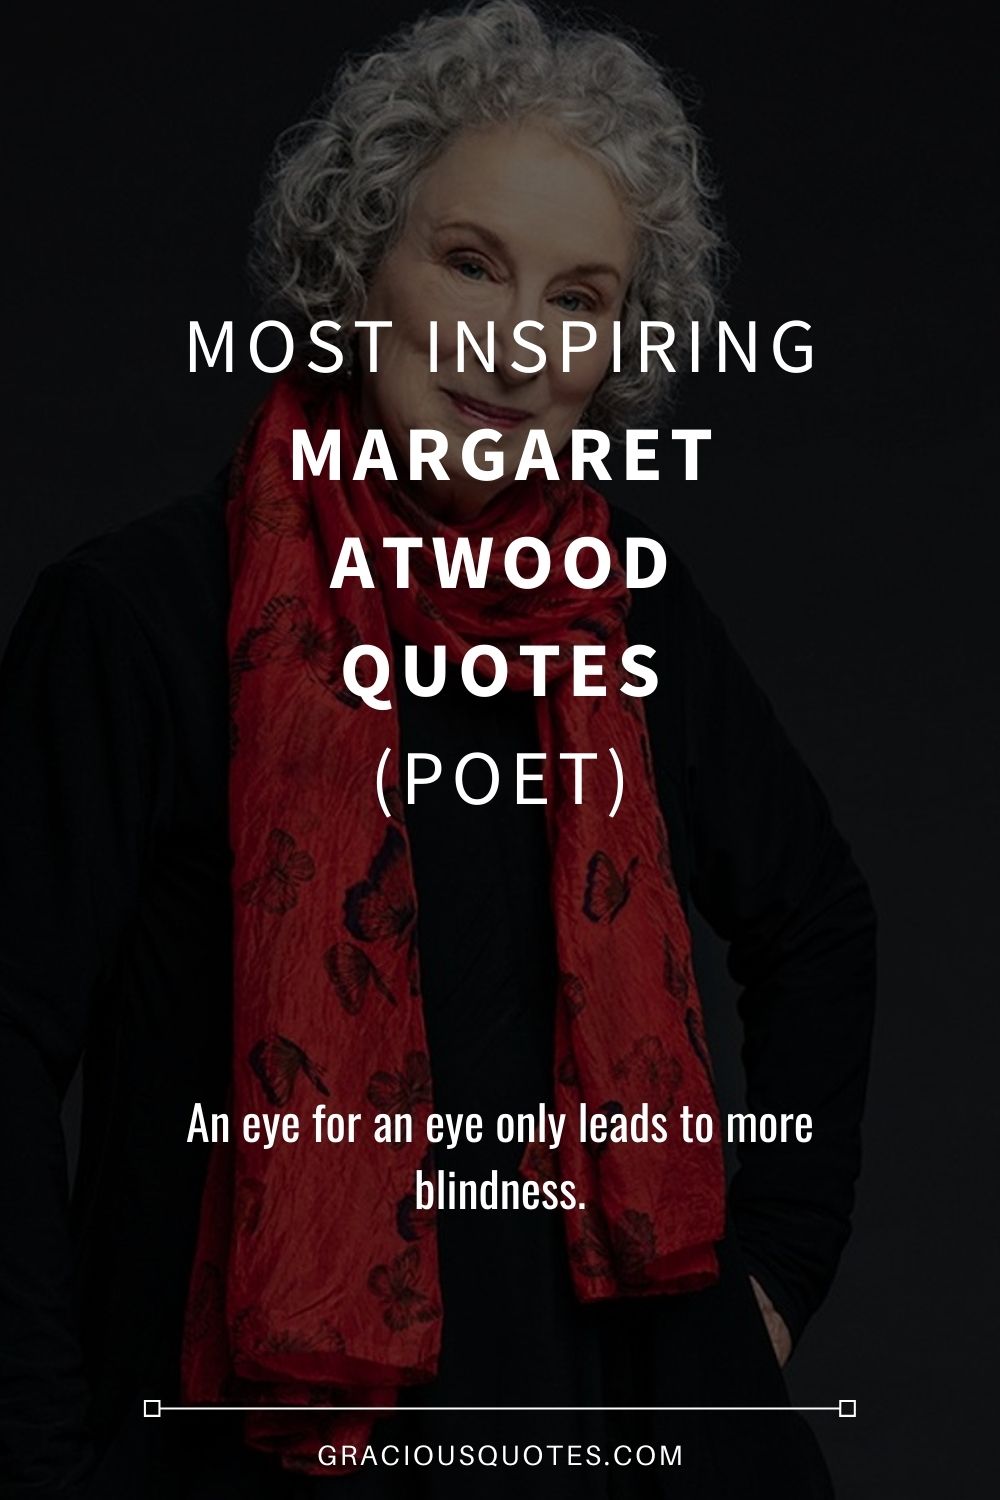 Most Inspiring Margaret Atwood Quotes (POET) - Gracious Quotes